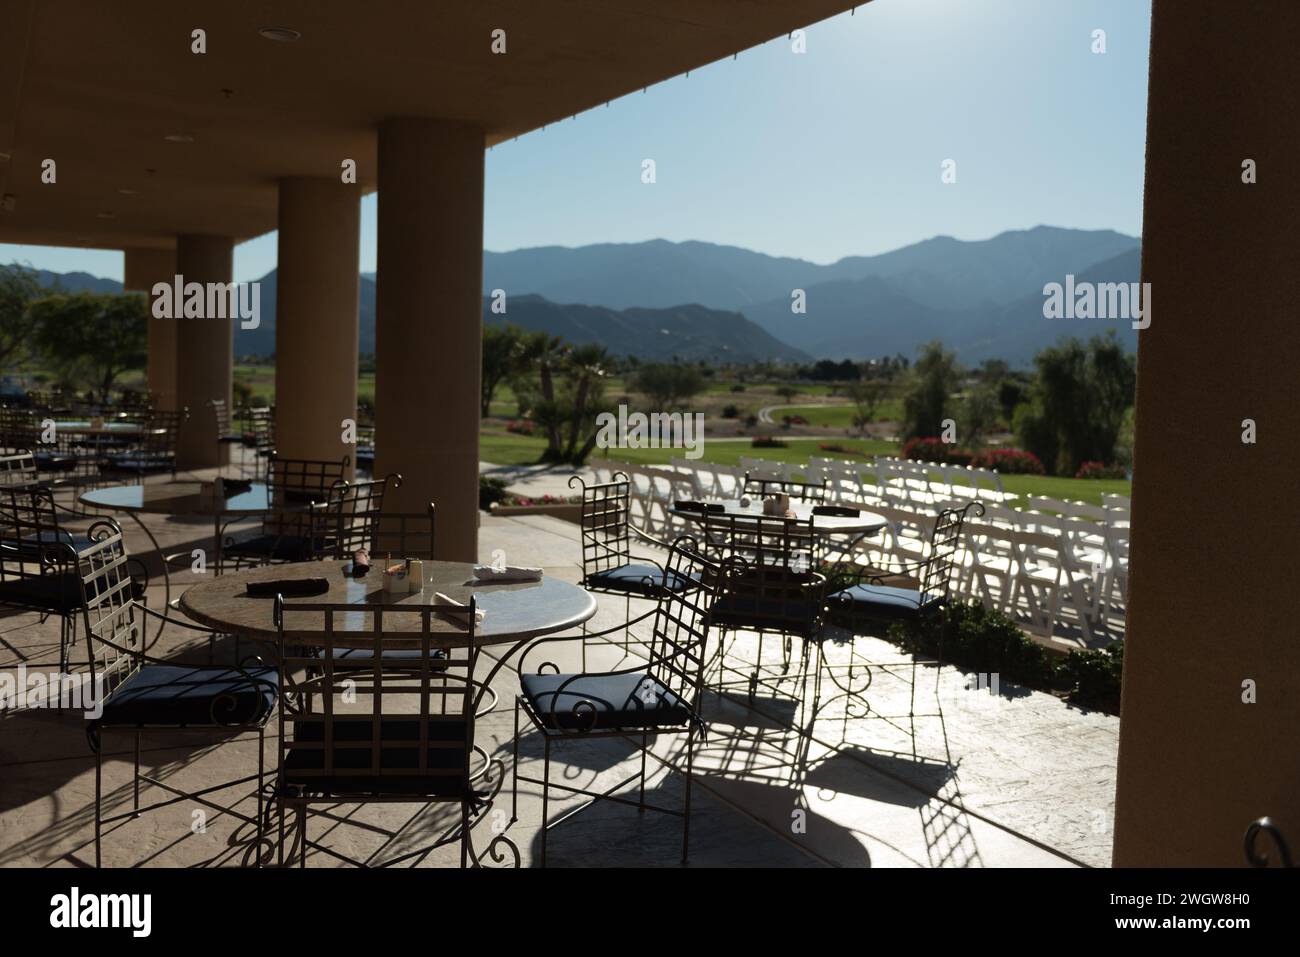 Empty outdoor patio with tables and chairs arranged to offer a picturesque view of the mountains Stock Photo